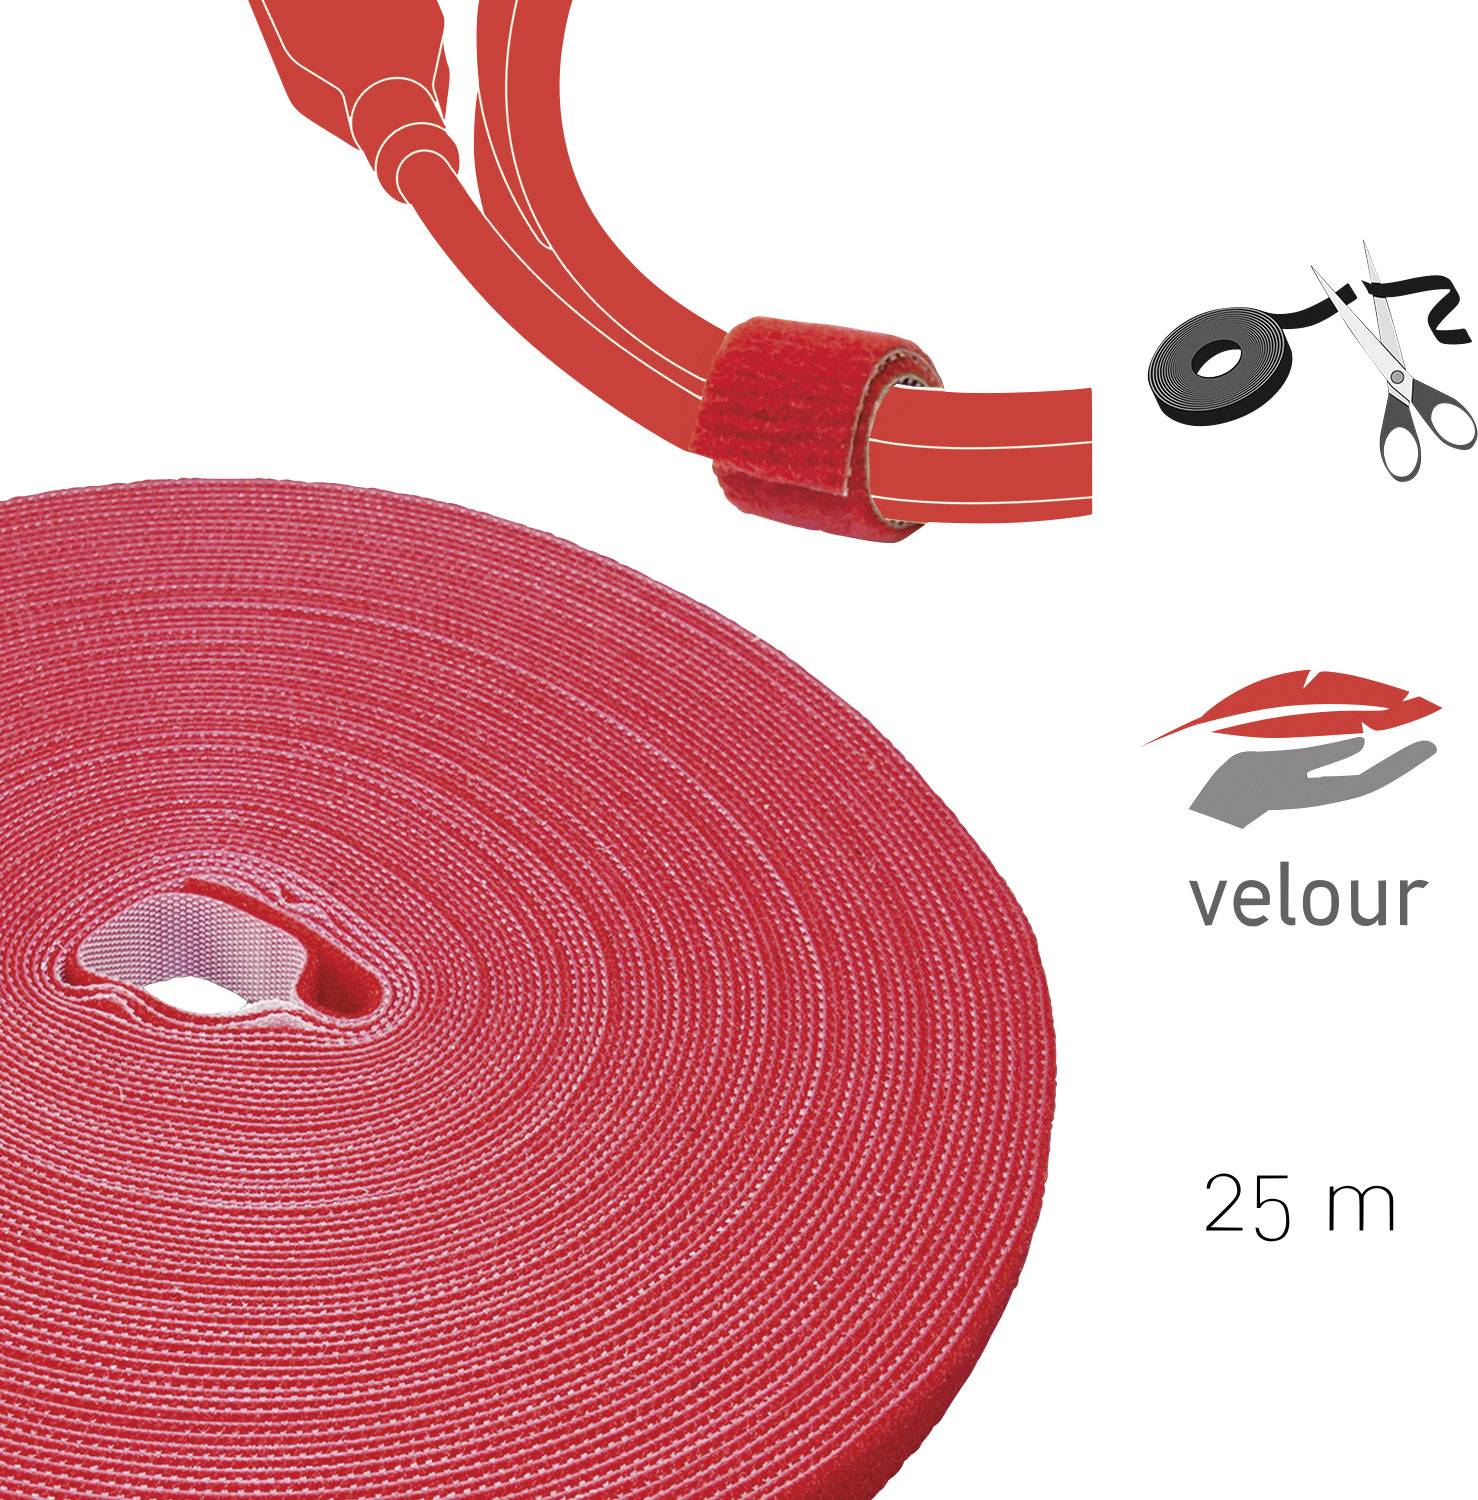 LABEL-THE-CABLE Roll, LTC PRO 1260, doppelseitige Klettbandrolle, 25 Meter rot